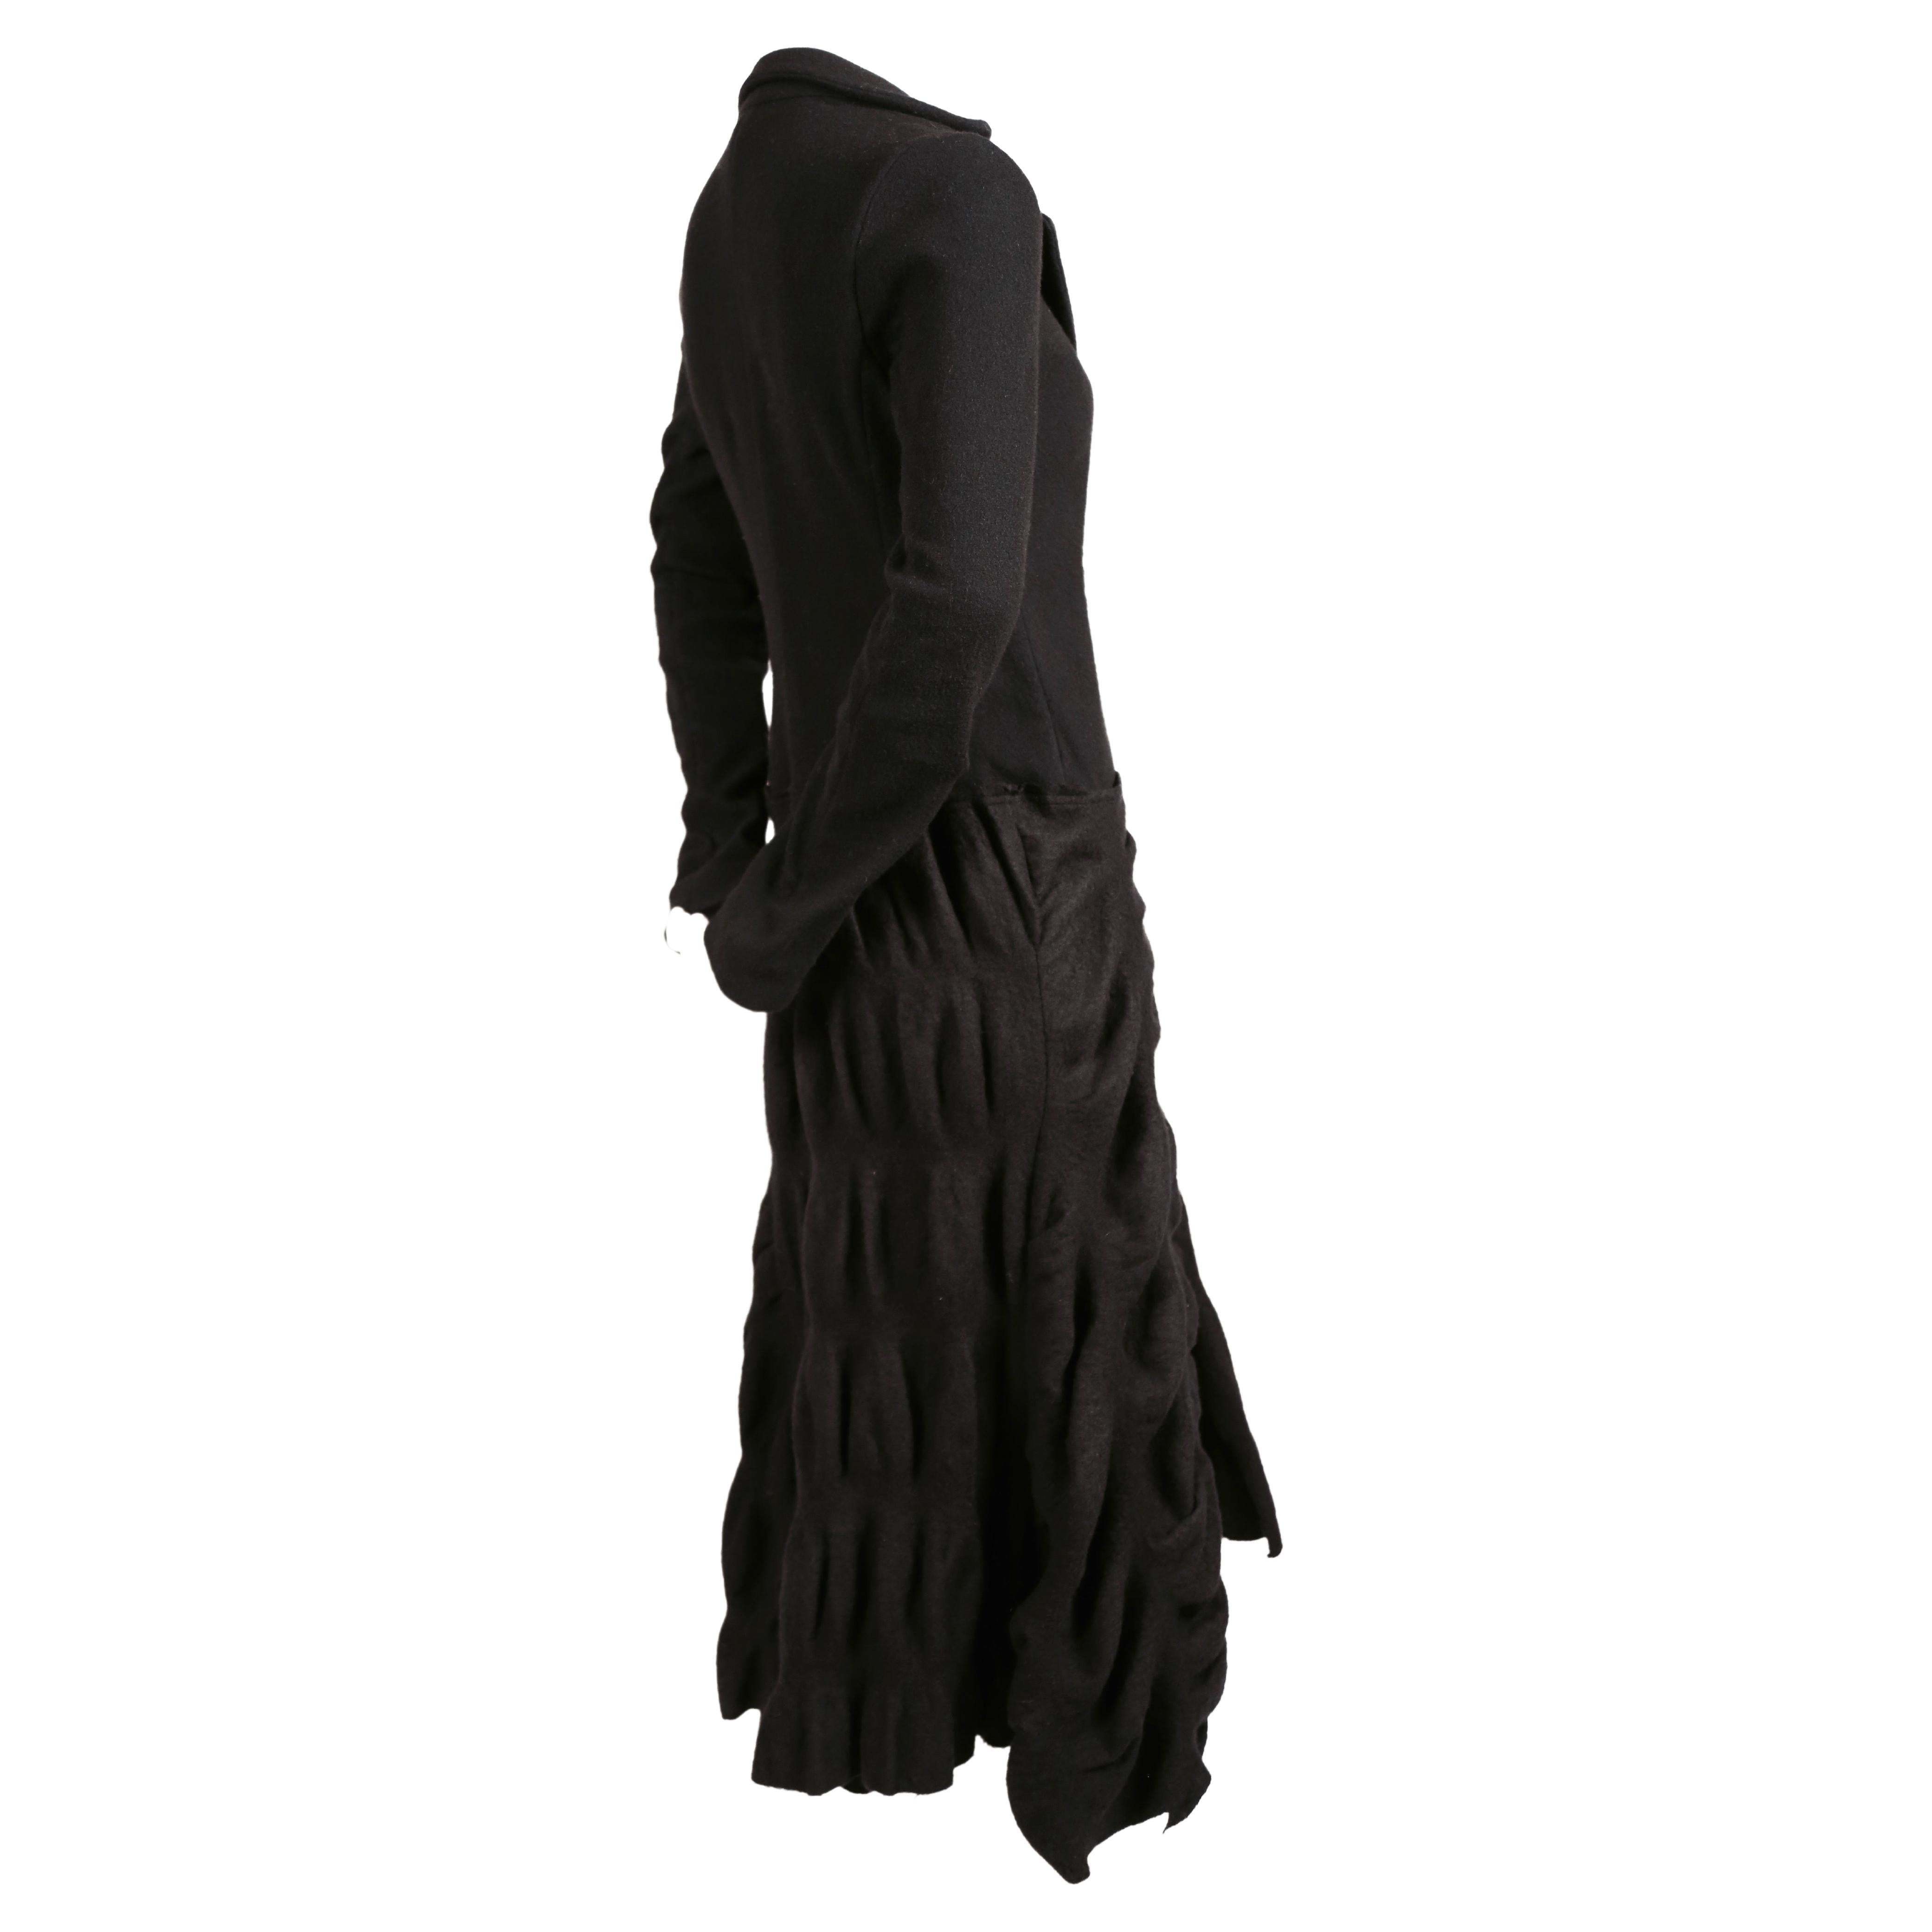 Long black coat with puckered wool fabric designed by Roberto Cavalli for Just Cavalli. Italian size 40. Approximate measurements: shoulder 15